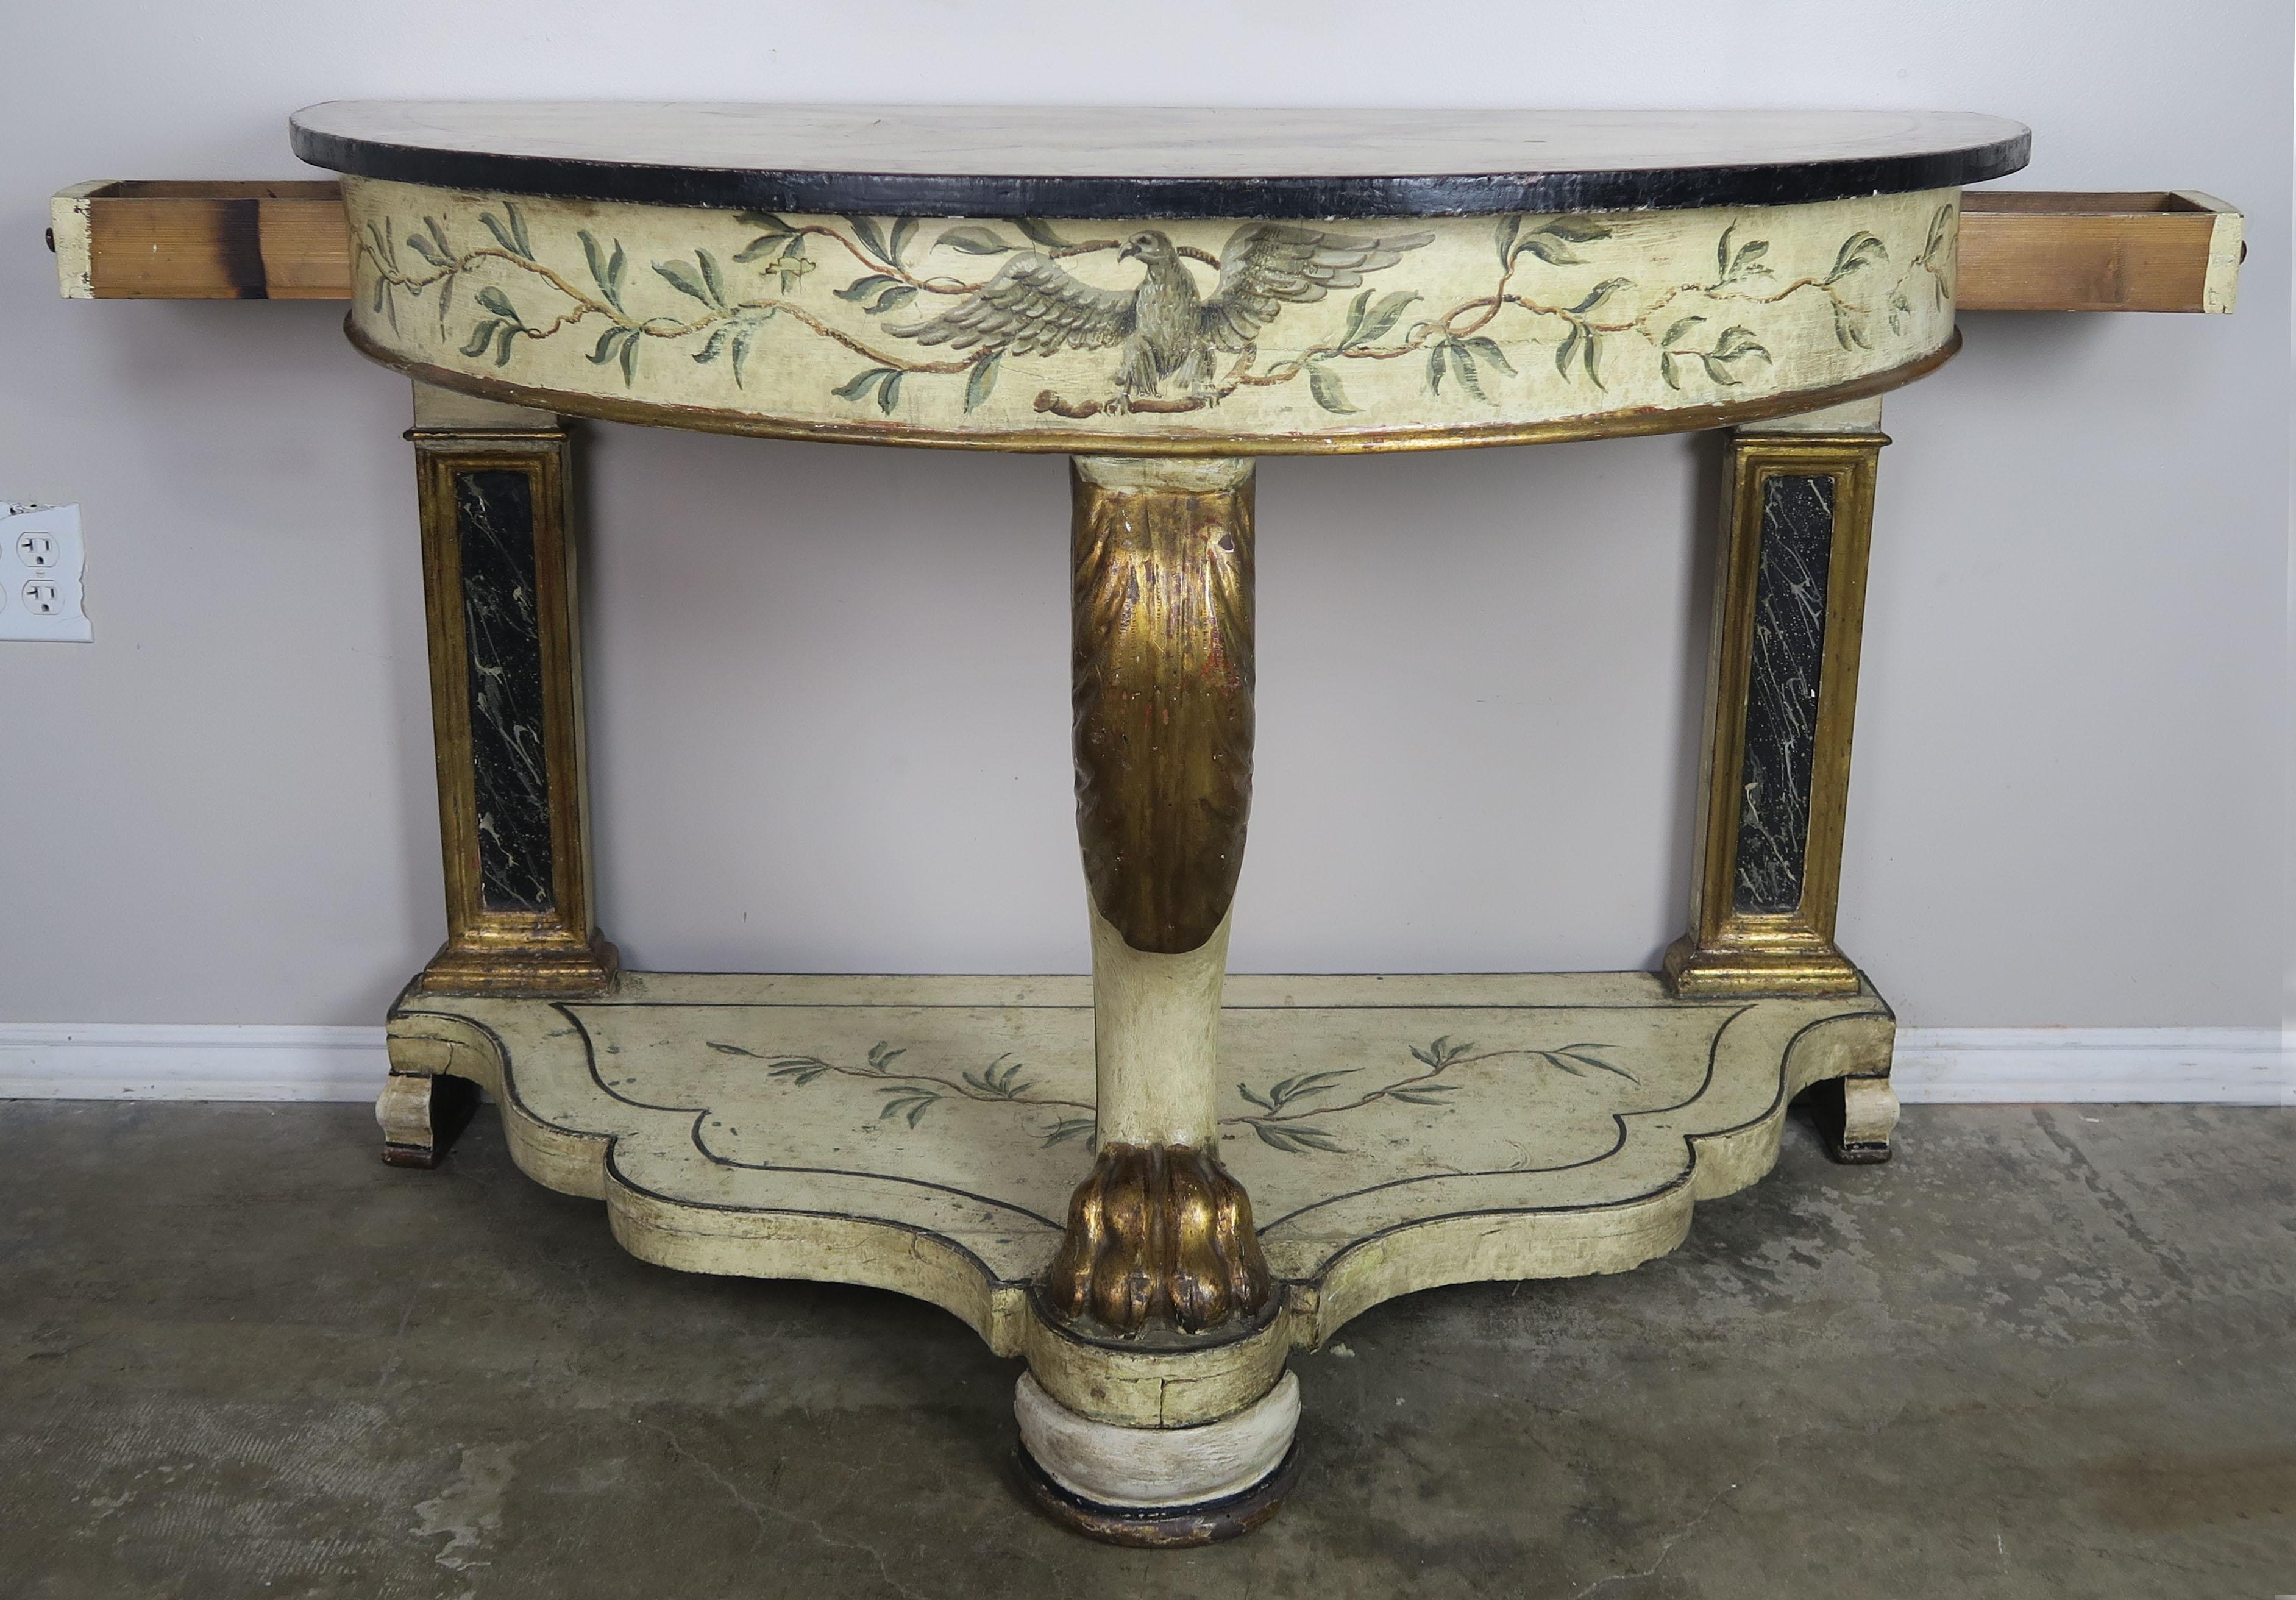 19th century English painted and parcel gilt demilune console table with serpentine shaped painted base. The table stands on three legs with a gilt wood let and paw in the front. Two small drawers at sides of console. Hand painted bird on the apron